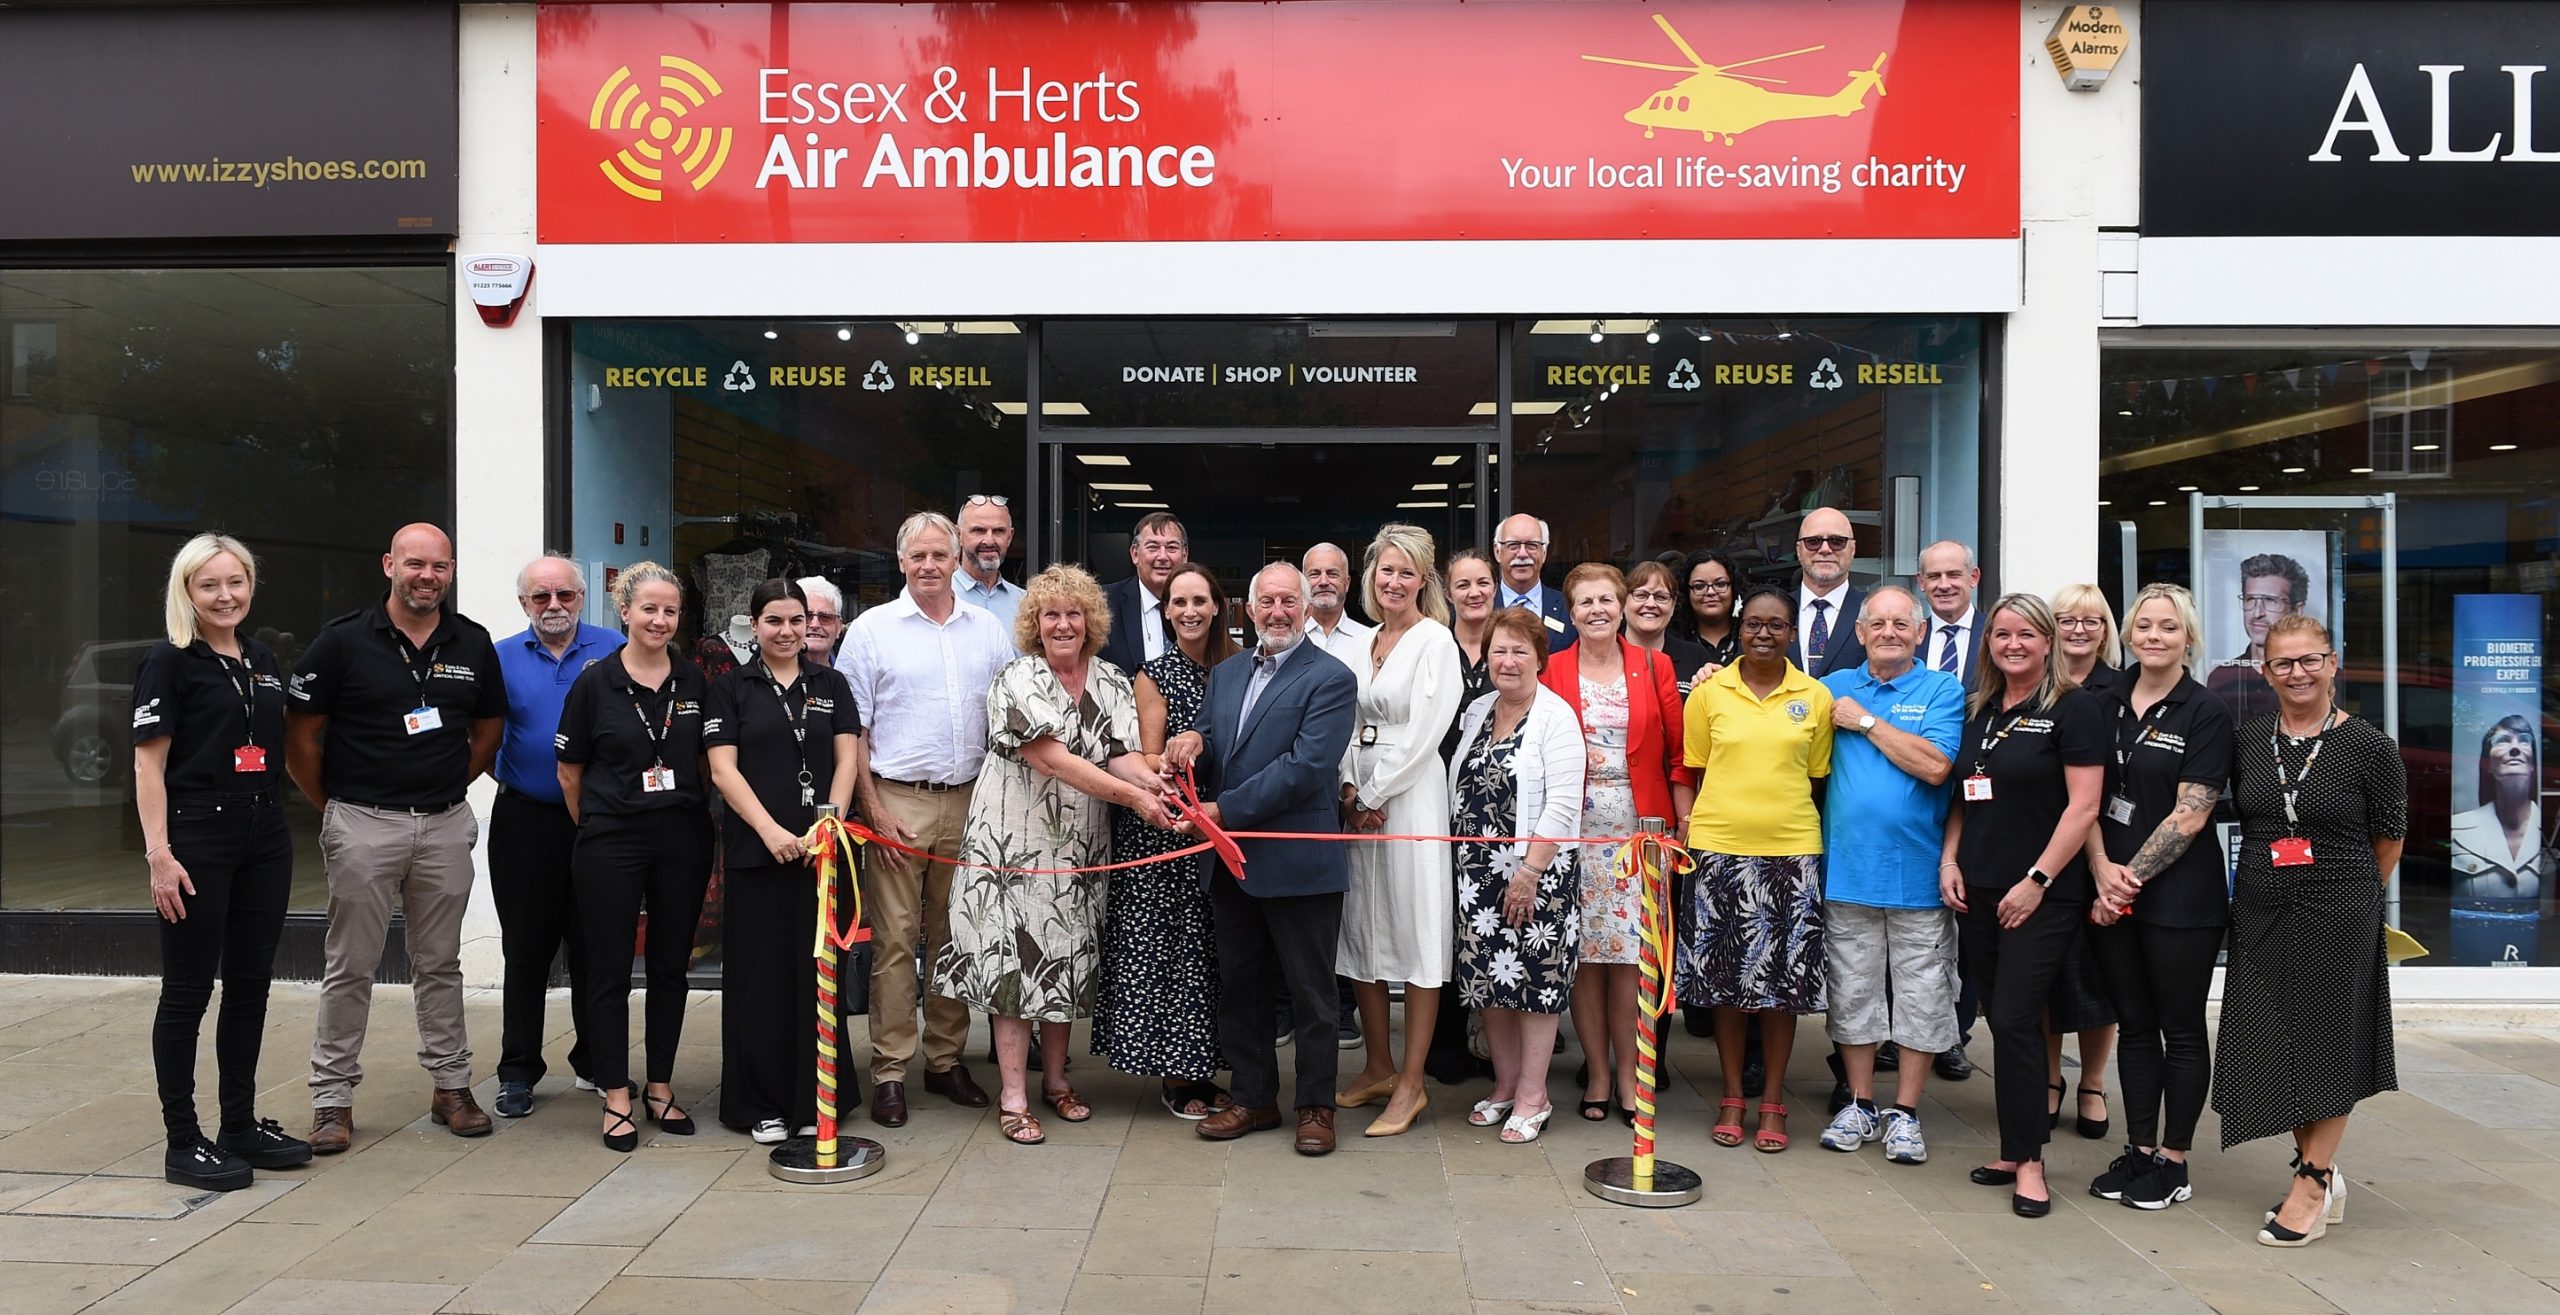 EHAAT officially opens its new charity shop in Letchworth